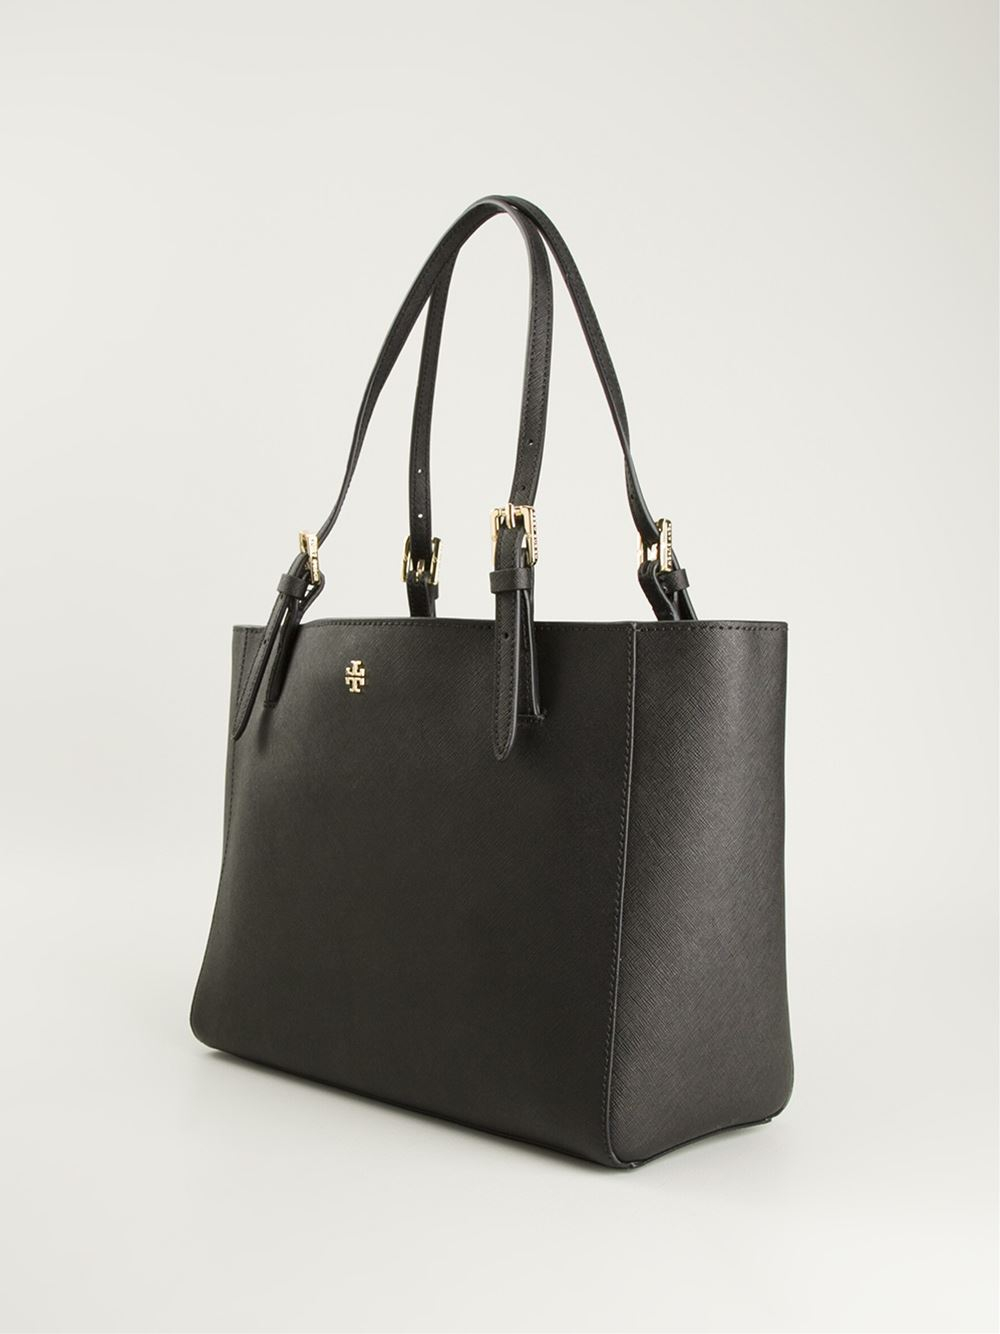 Tory burch Small 'york' Buckle Tote in Black | Lyst